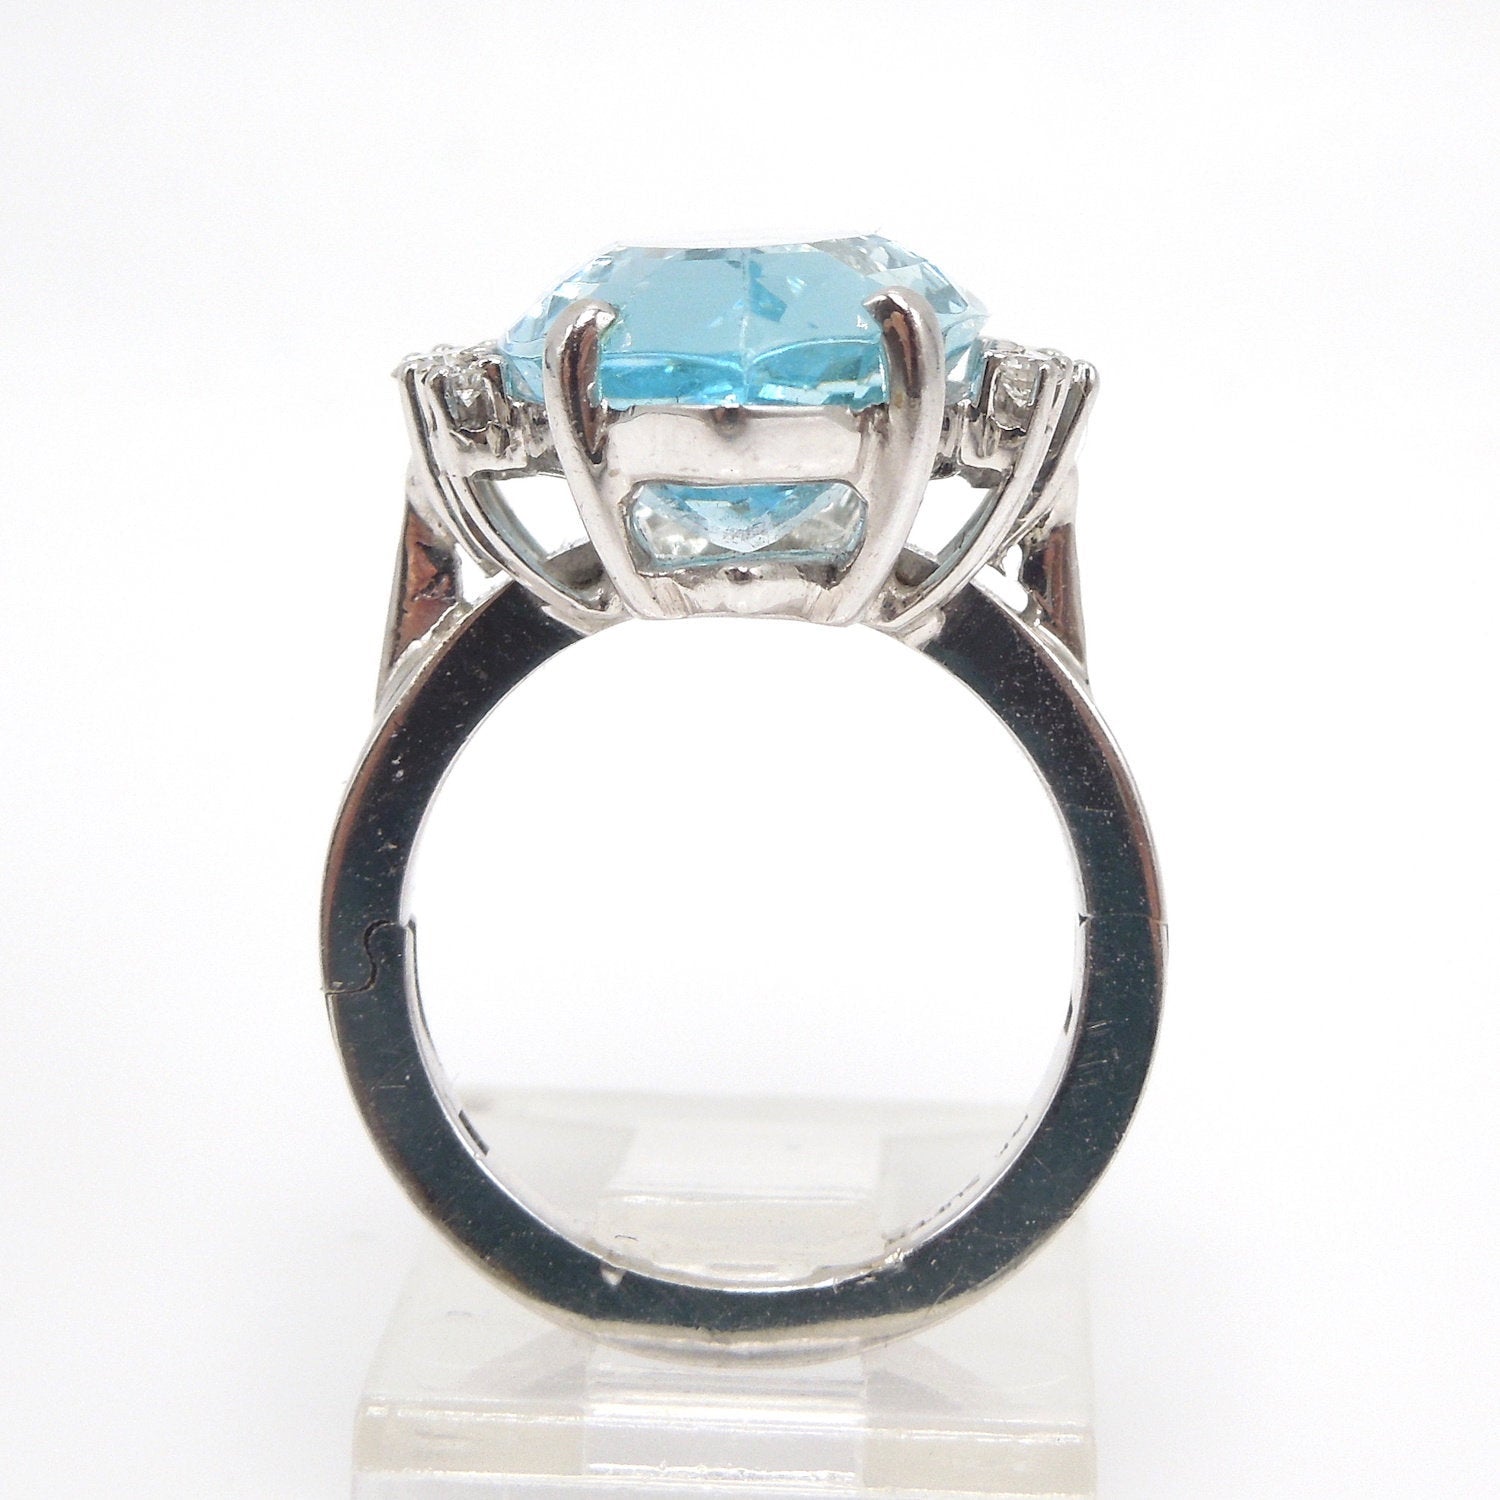 Large 8.00ct Marquise Cut Aquamarine and Diamond Ring in White Gold